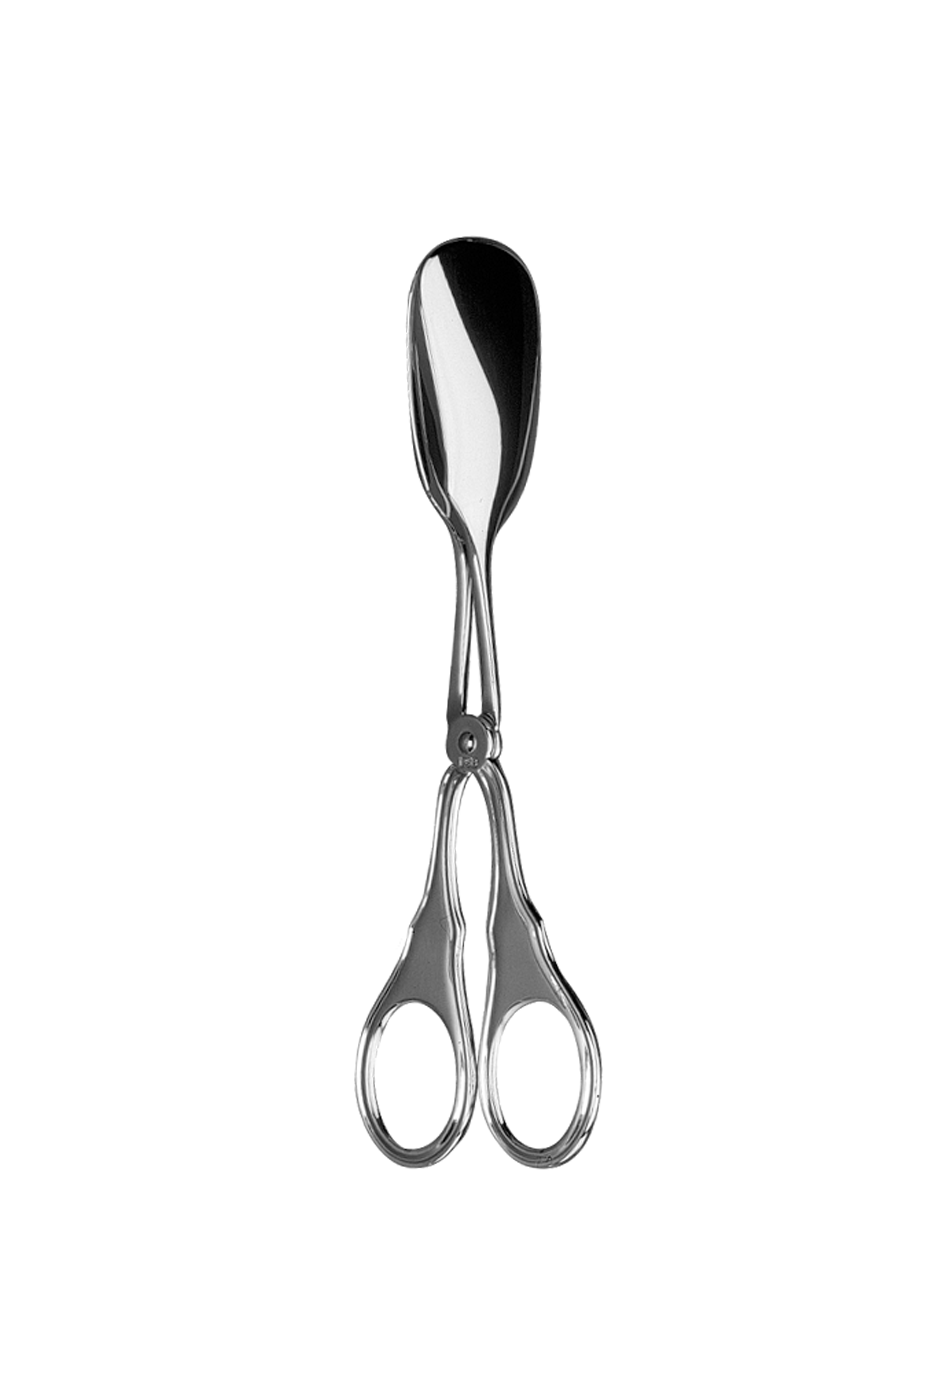 Spaten Pastry tongs (925 Sterling Silver)